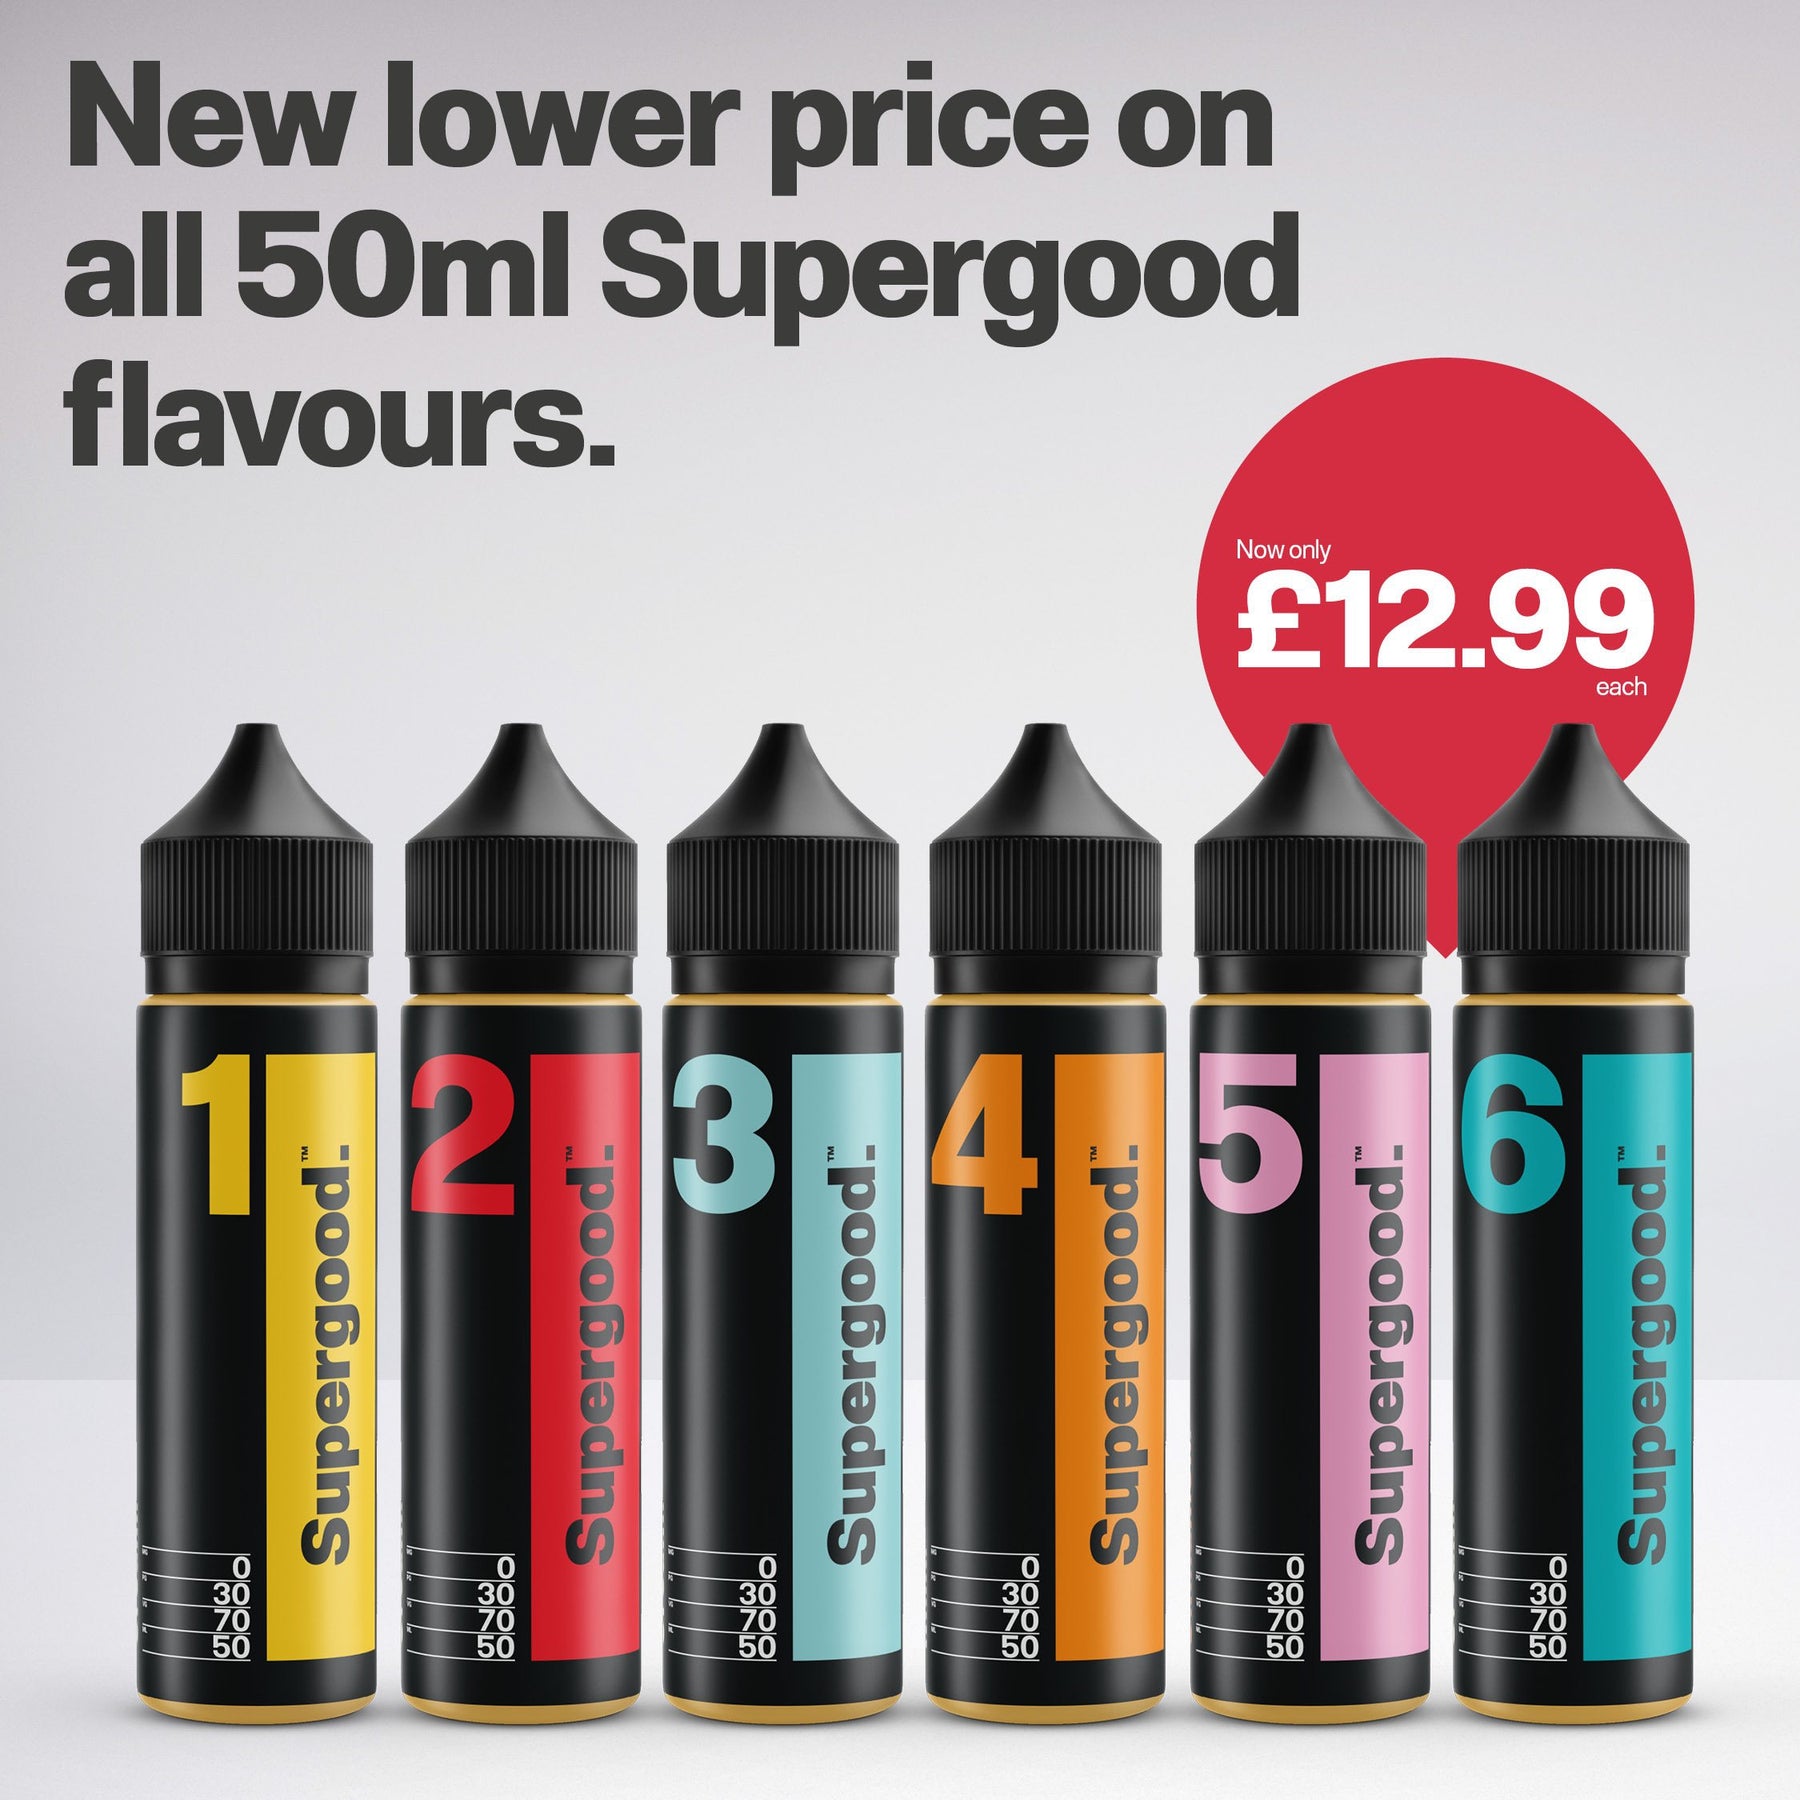 News-New lower price on all 50ml's | We Are Supergood.